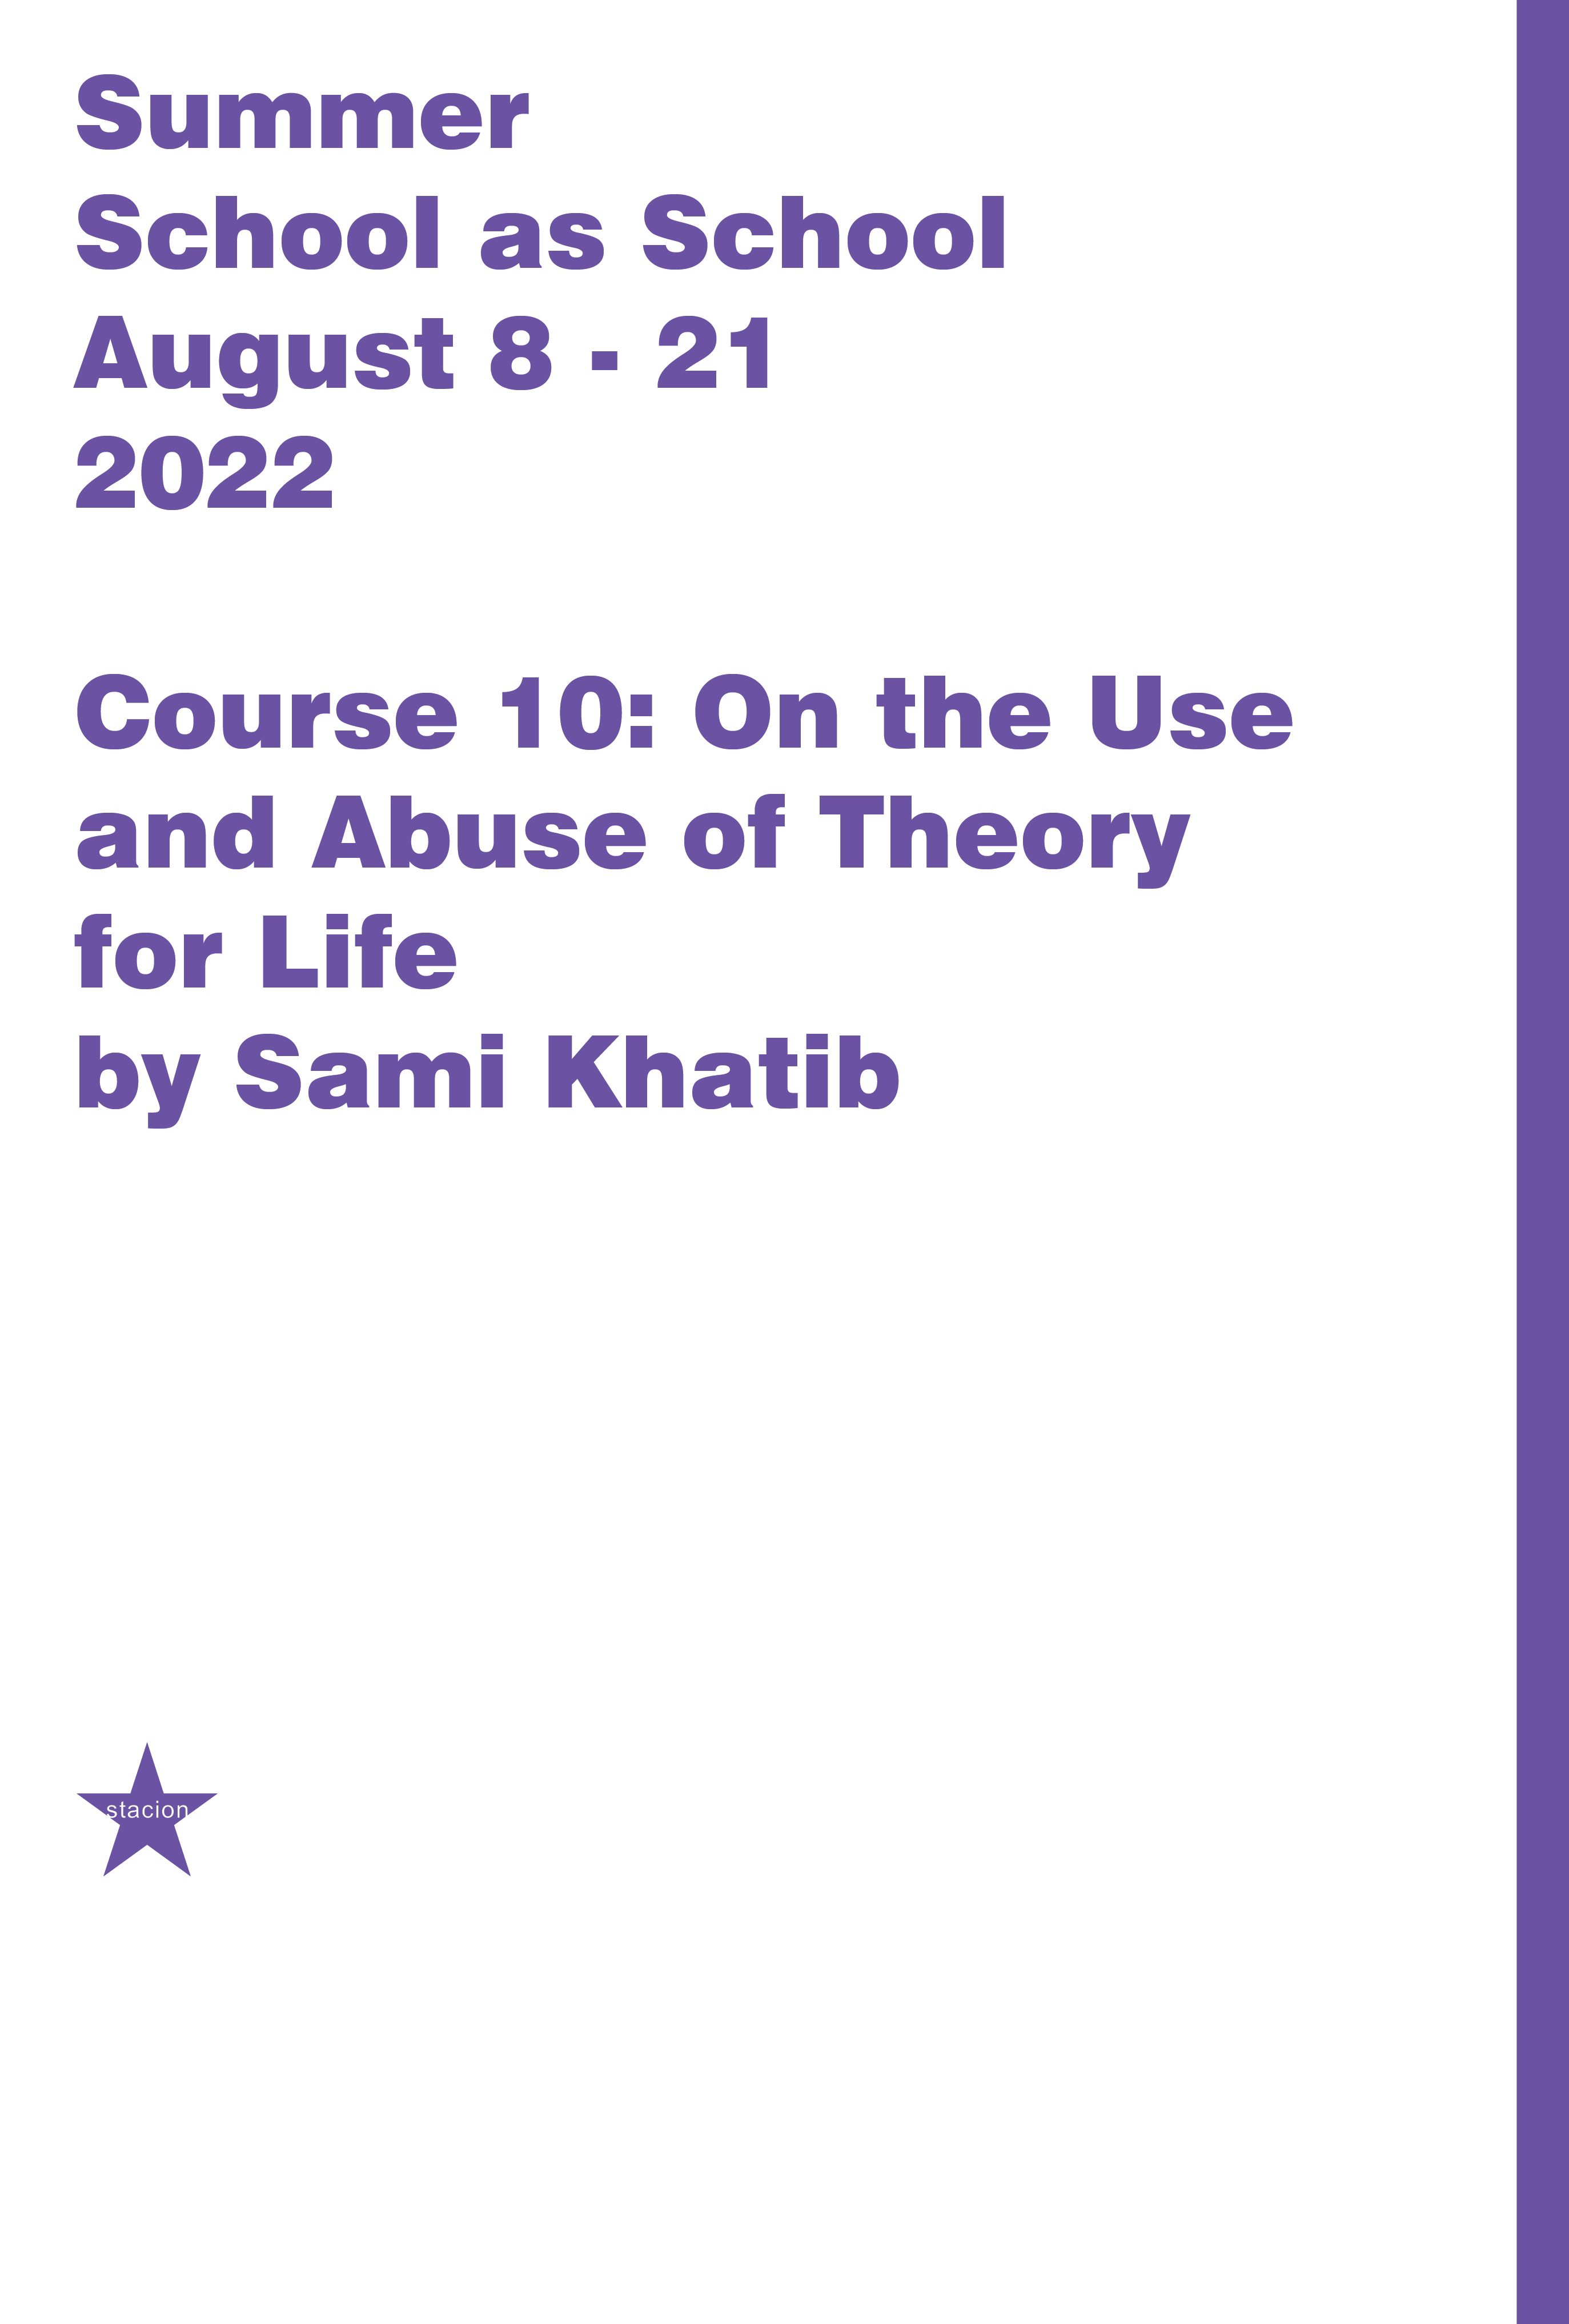 Course 10: On the Use and Abuse of Theory for Life